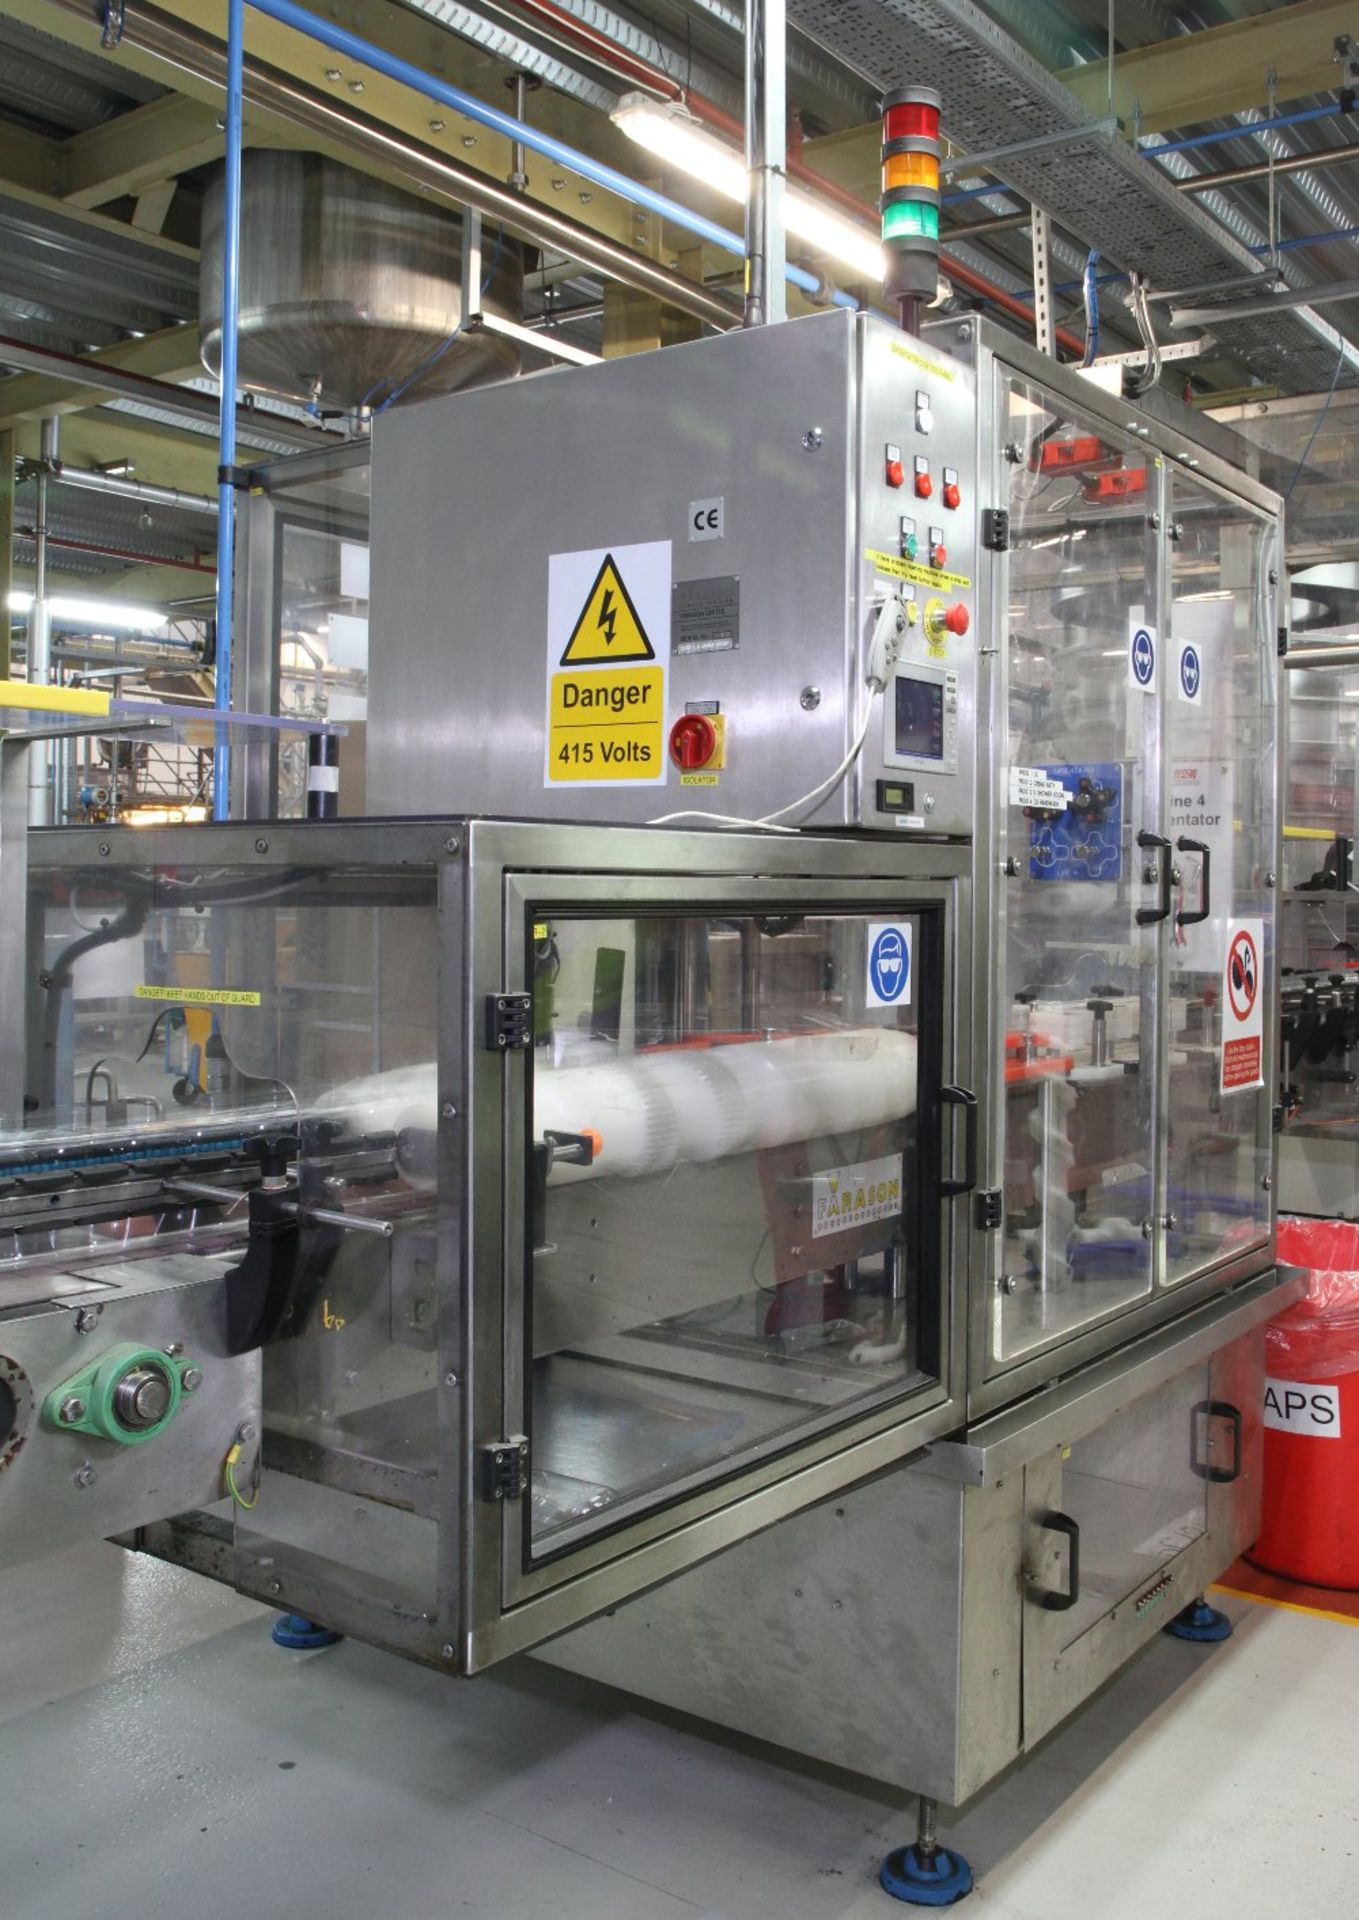 Contents Of World Class Manufacturer's Bottling Line. - Image 24 of 87